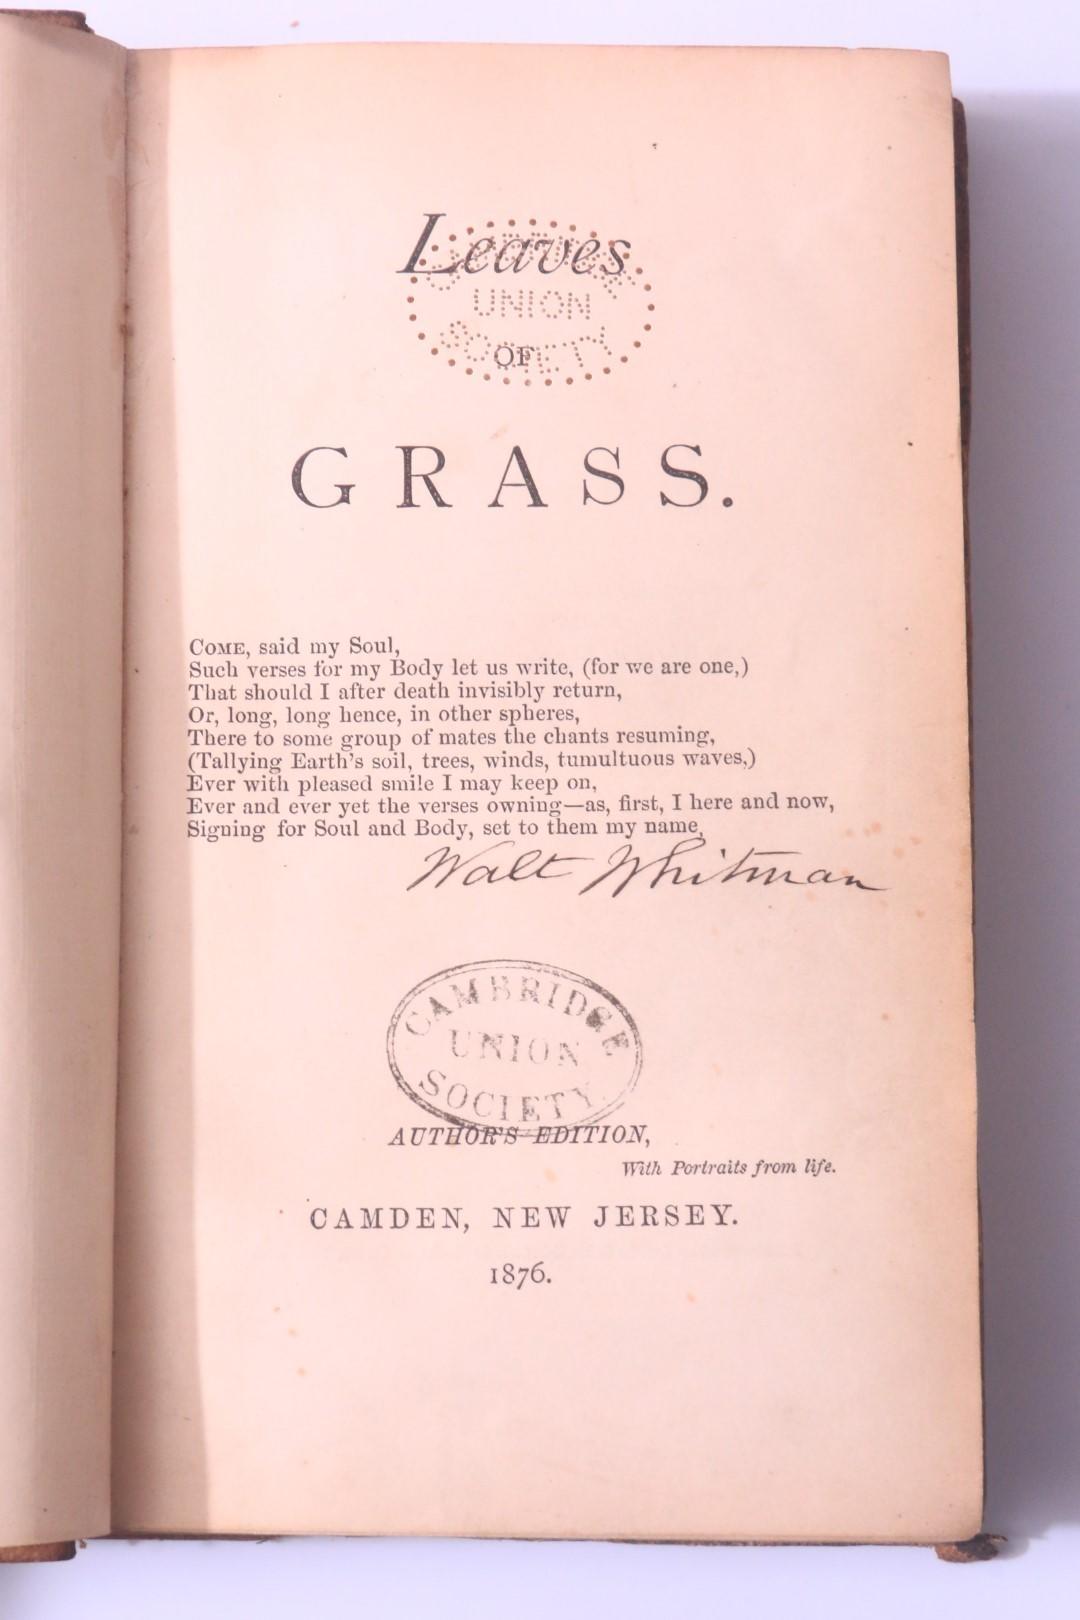 Walt Whitman - Leaves of Grass: Author's Edition - No Publisher, 1876, Signed Limited Edition.